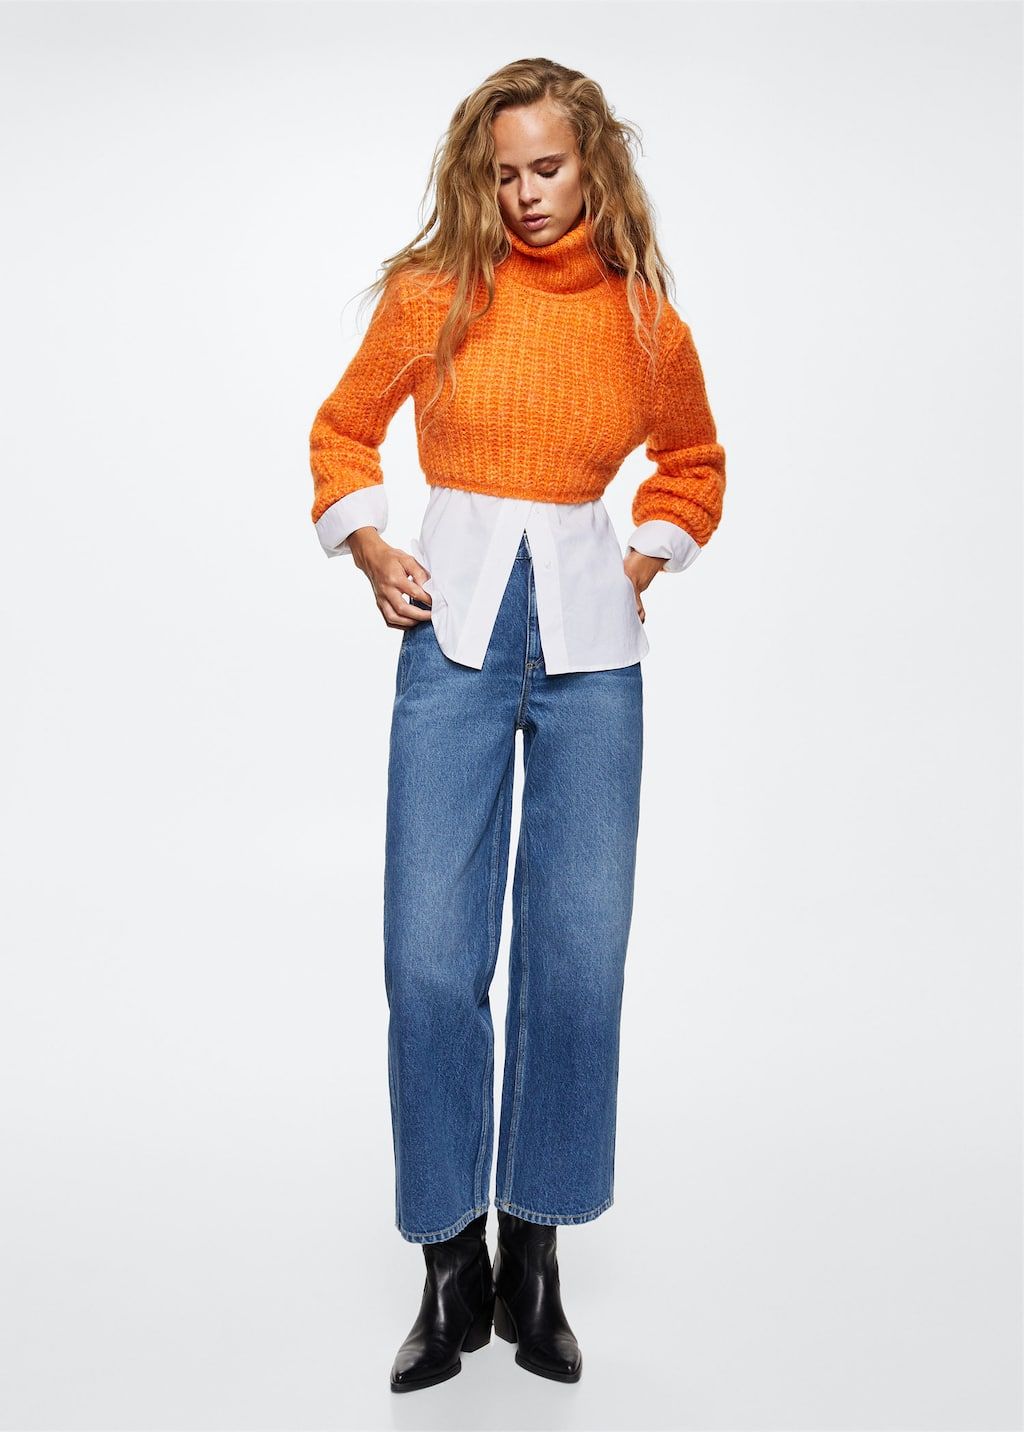 Mango Knitted Cropped Sweater